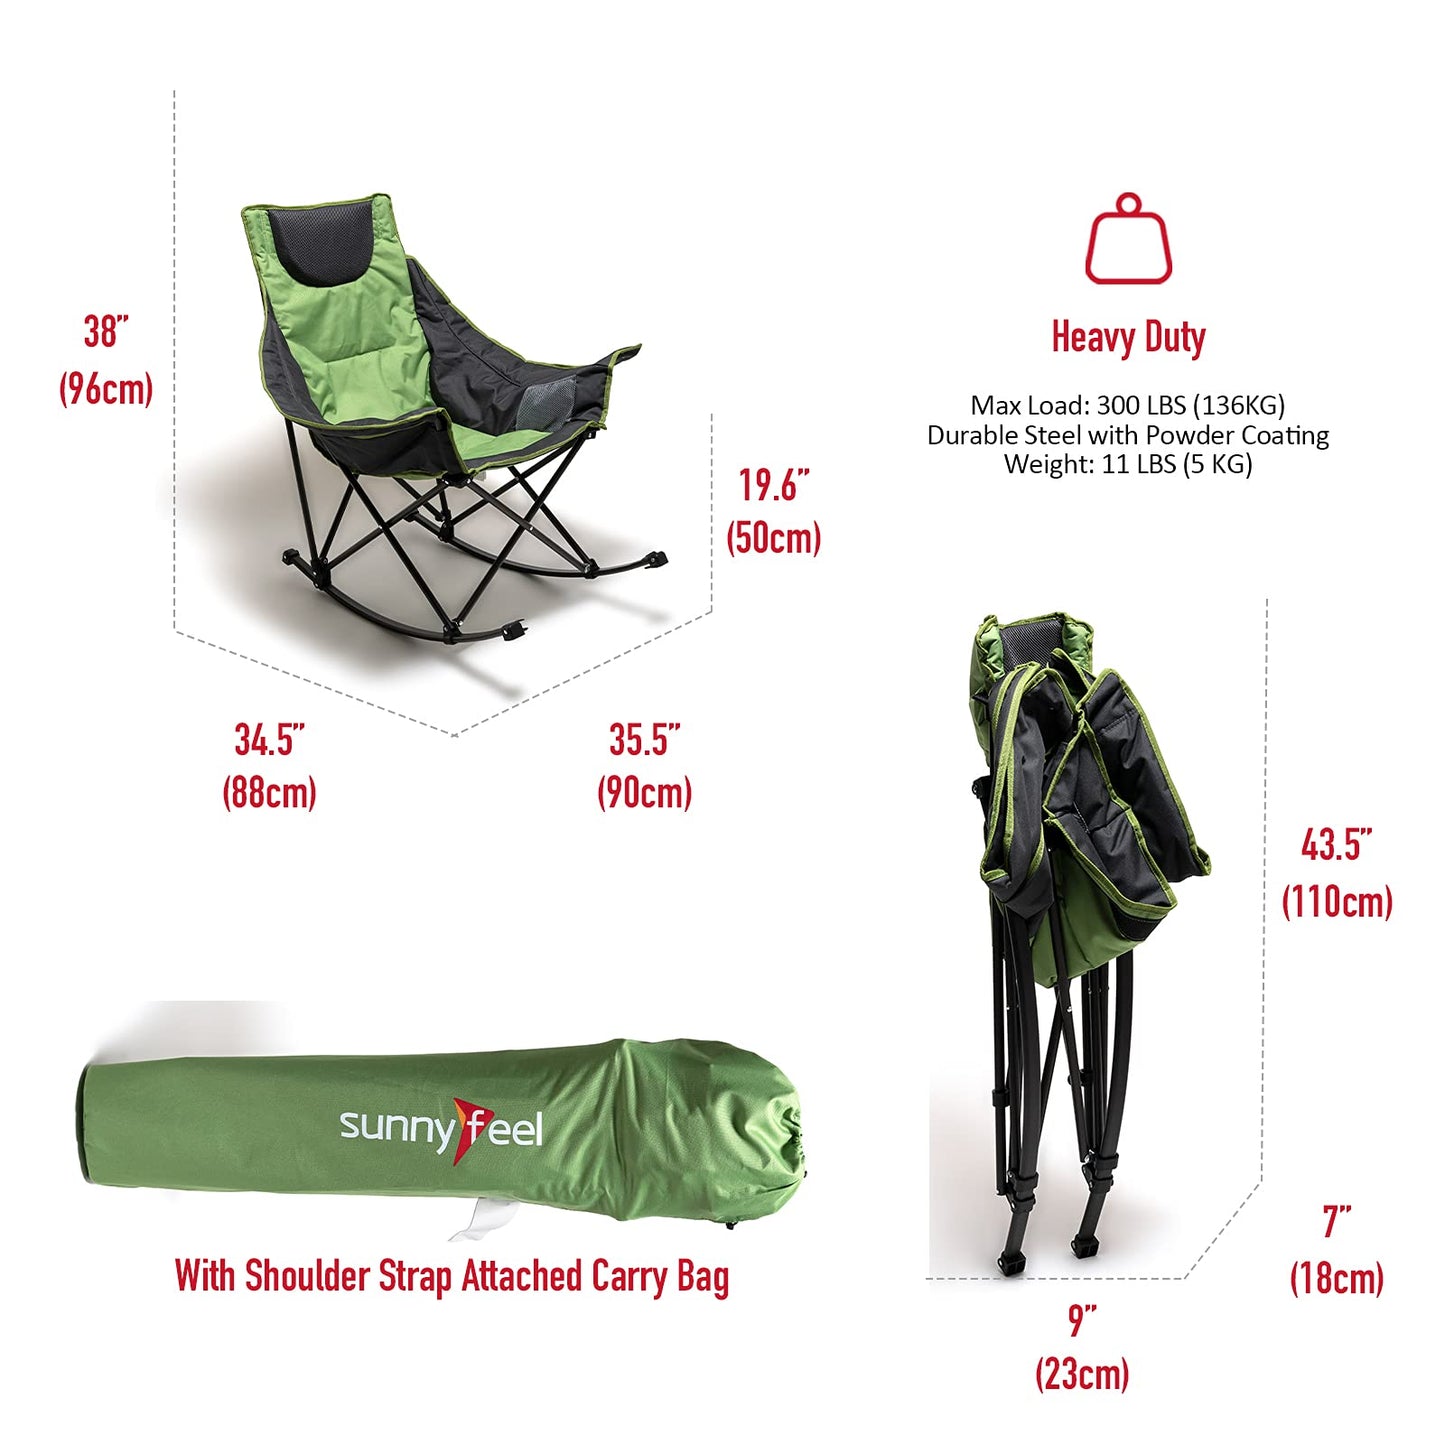 SUNNYFEEL Camping Rocking Chair, Oversized Folding Rocking Chairs with Luxury Padded Recliner & Pocket,Carry Bag, 300 LBS Heavy Duty for Lawn/Outdoor/Picnic/Patio, Portable Rocker Camp Chair (Green) Green